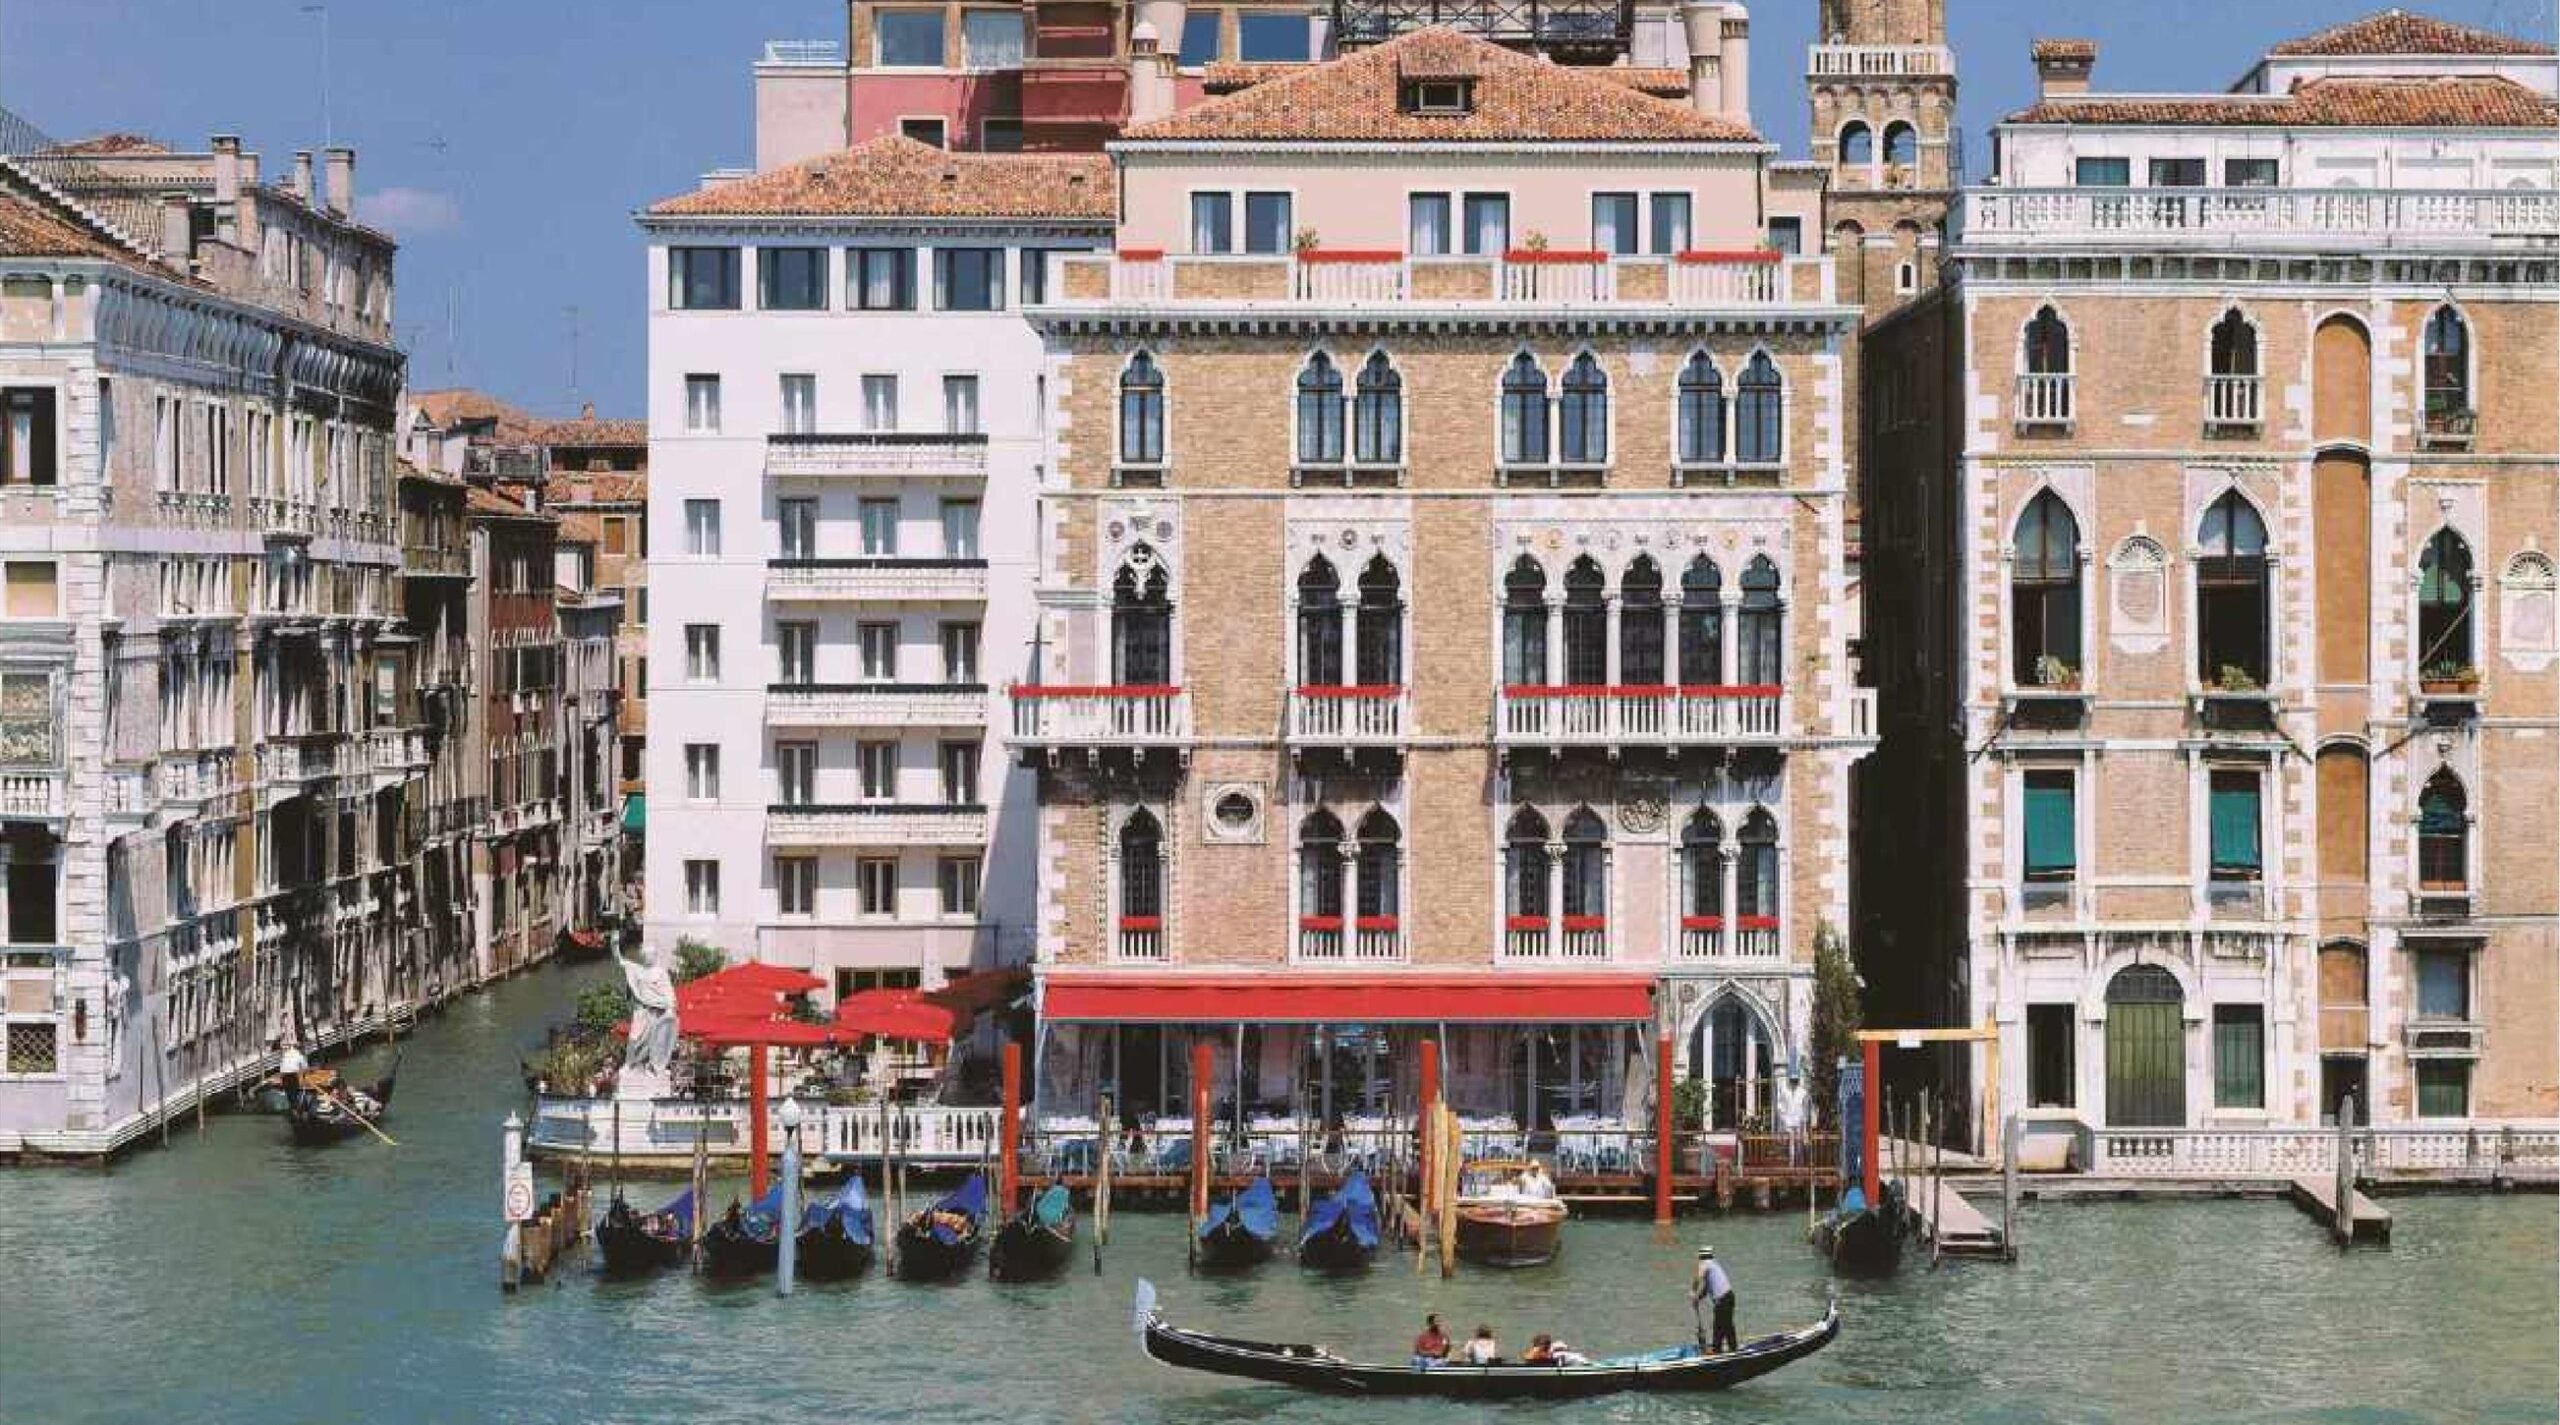 Rosewood Hotels to manage Hotel Bauer in Venice, Italy